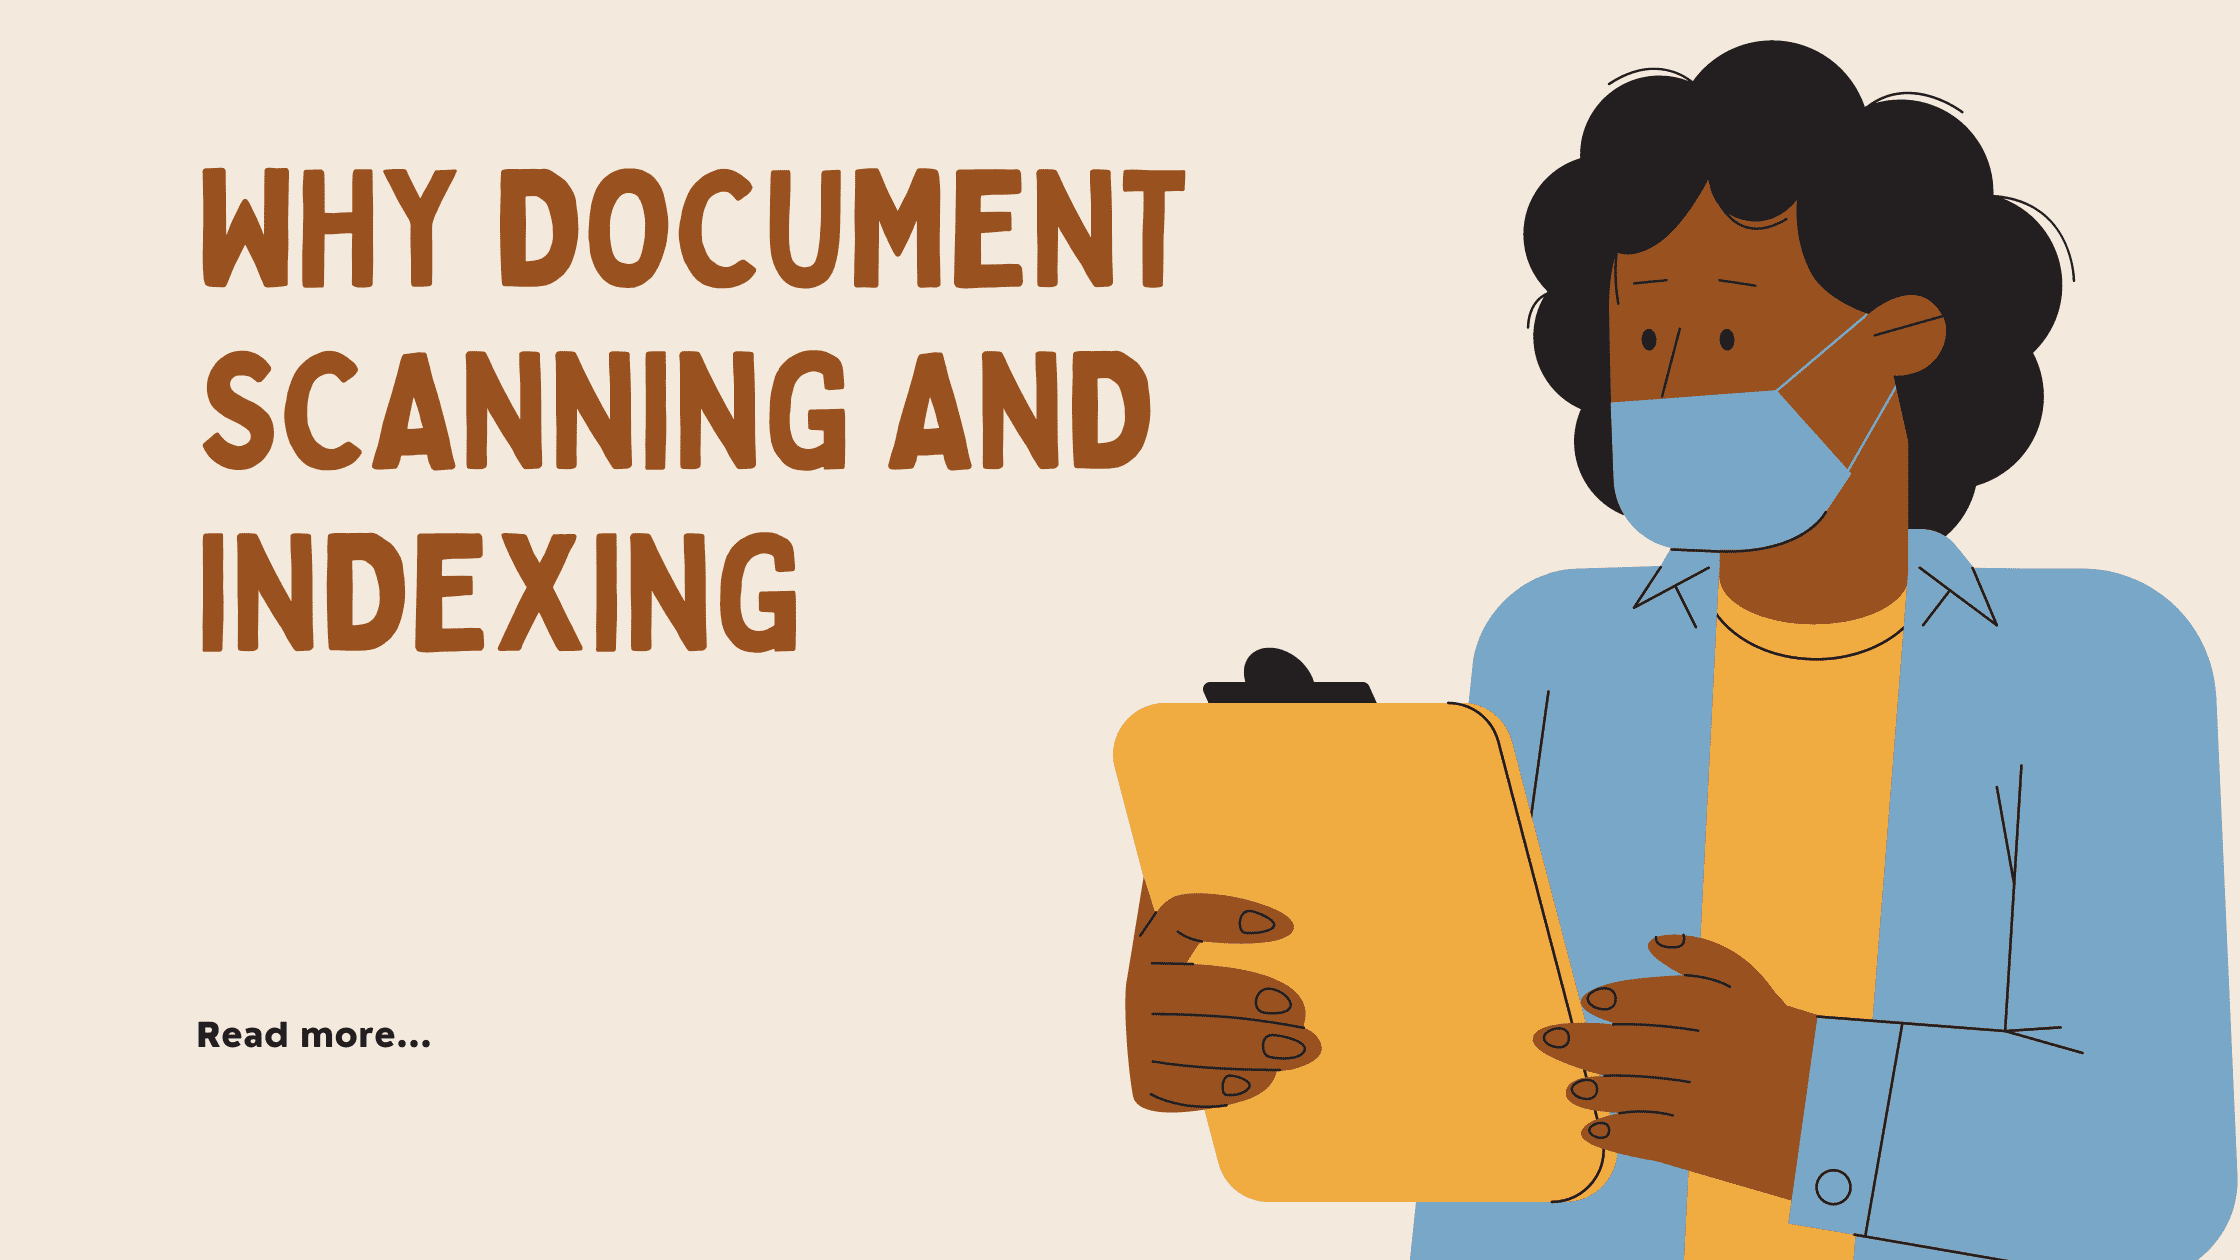 Why document scanning and indexing